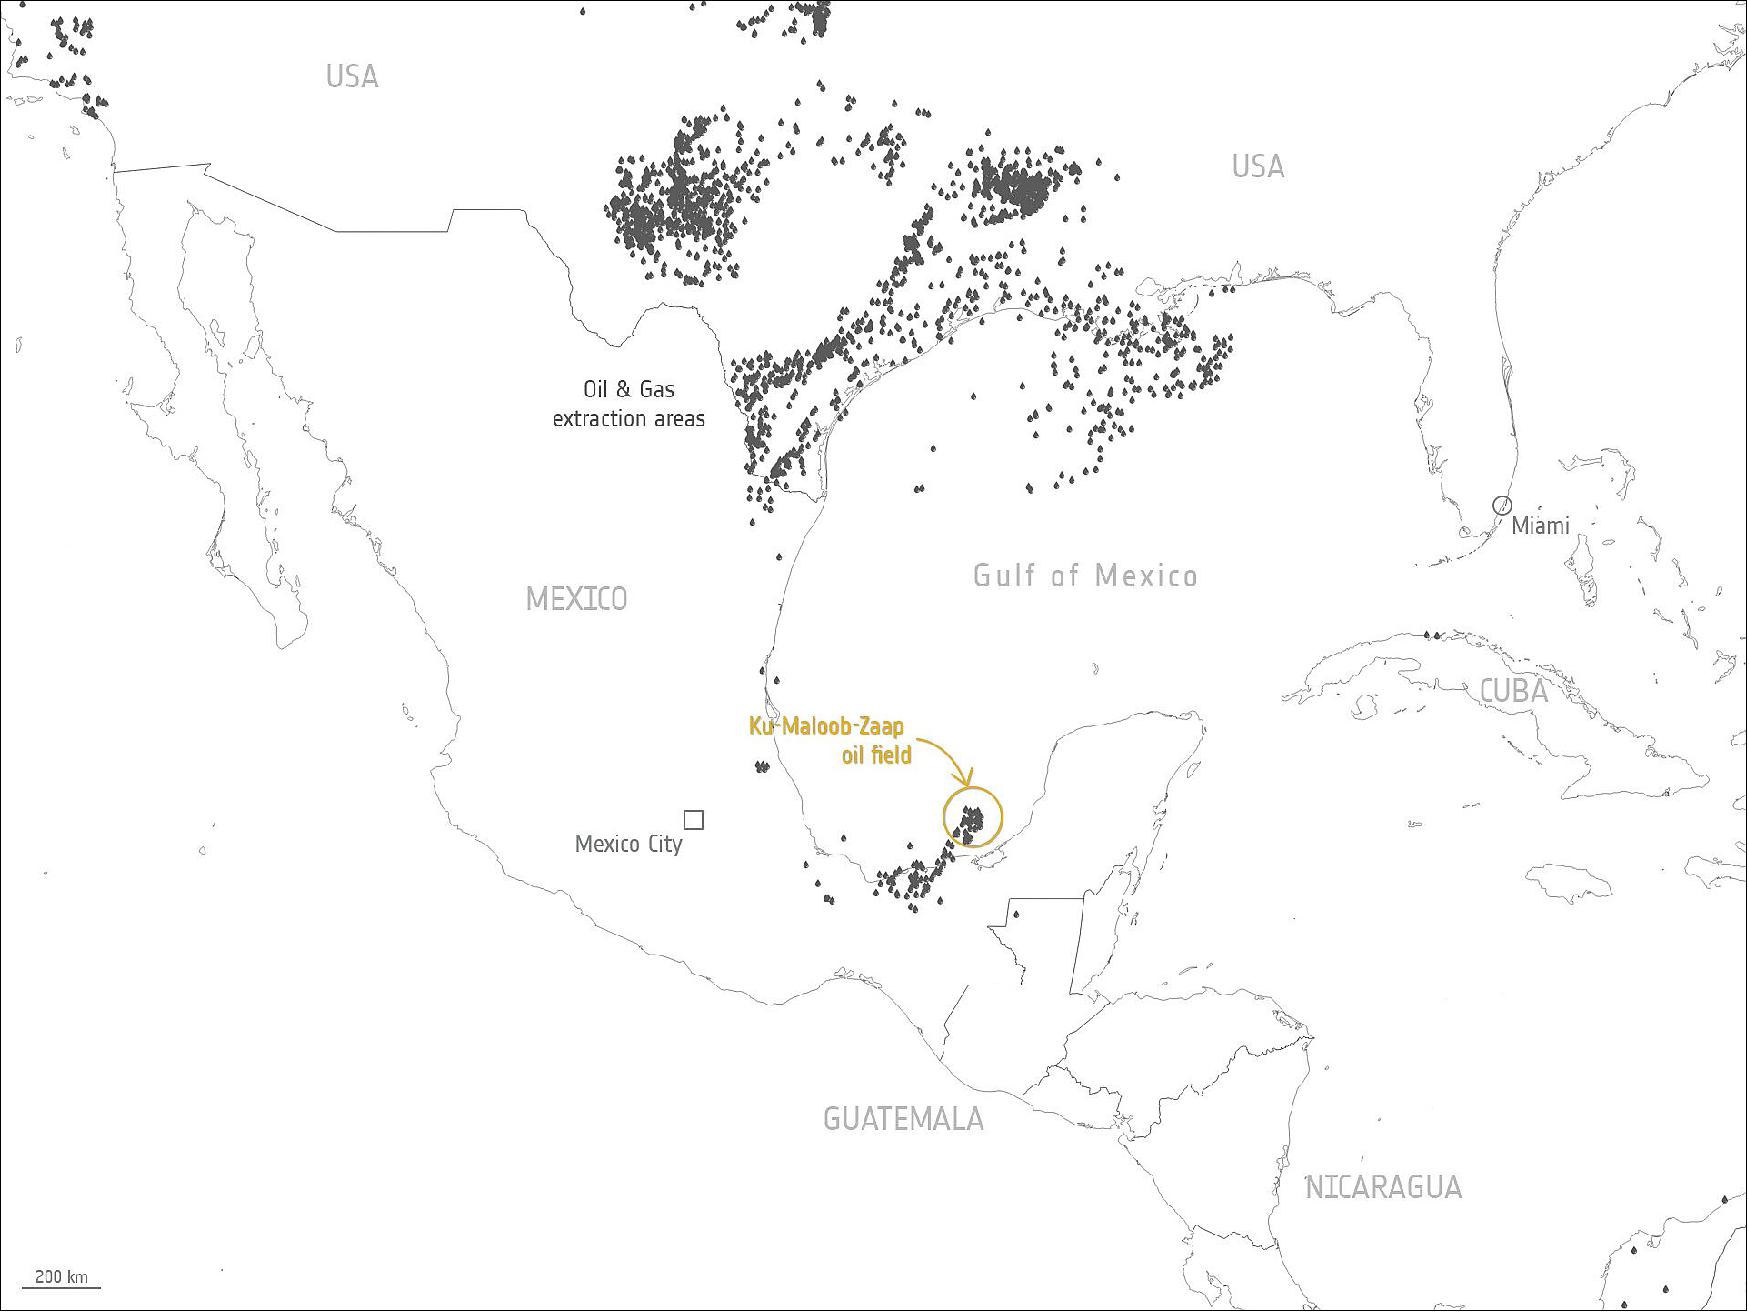 Figure 5: This map shows the oil and gas extraction areas in and around the Gulf of Mexico. Data has been extracted from the Global Energy Monitor [image credit: ESA (Data: Global Oil and Gas Extraction Tracker, Global Energy Monitor, January 2022)]